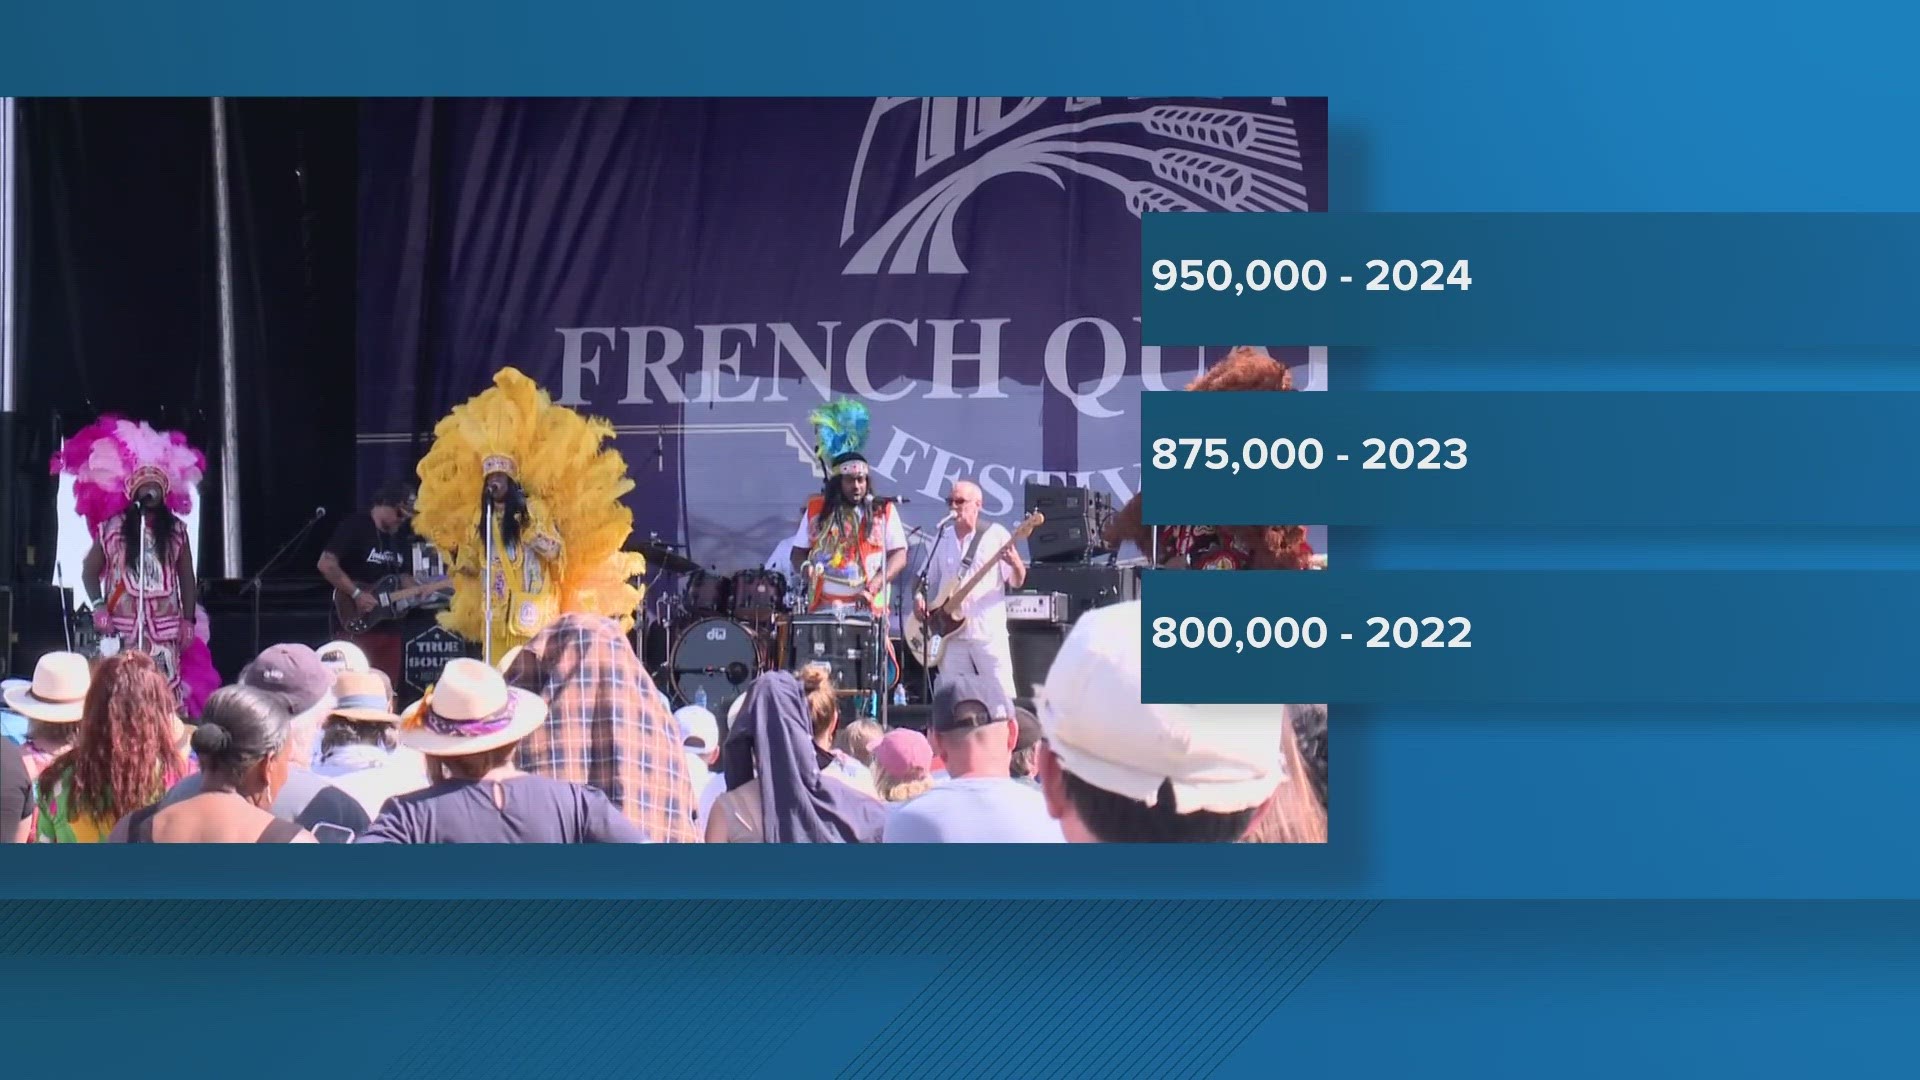 Organizers are touting a successful French Quarter Fest after opening new features and two new stages this year that included WWL's "Love Louisiana Stage."